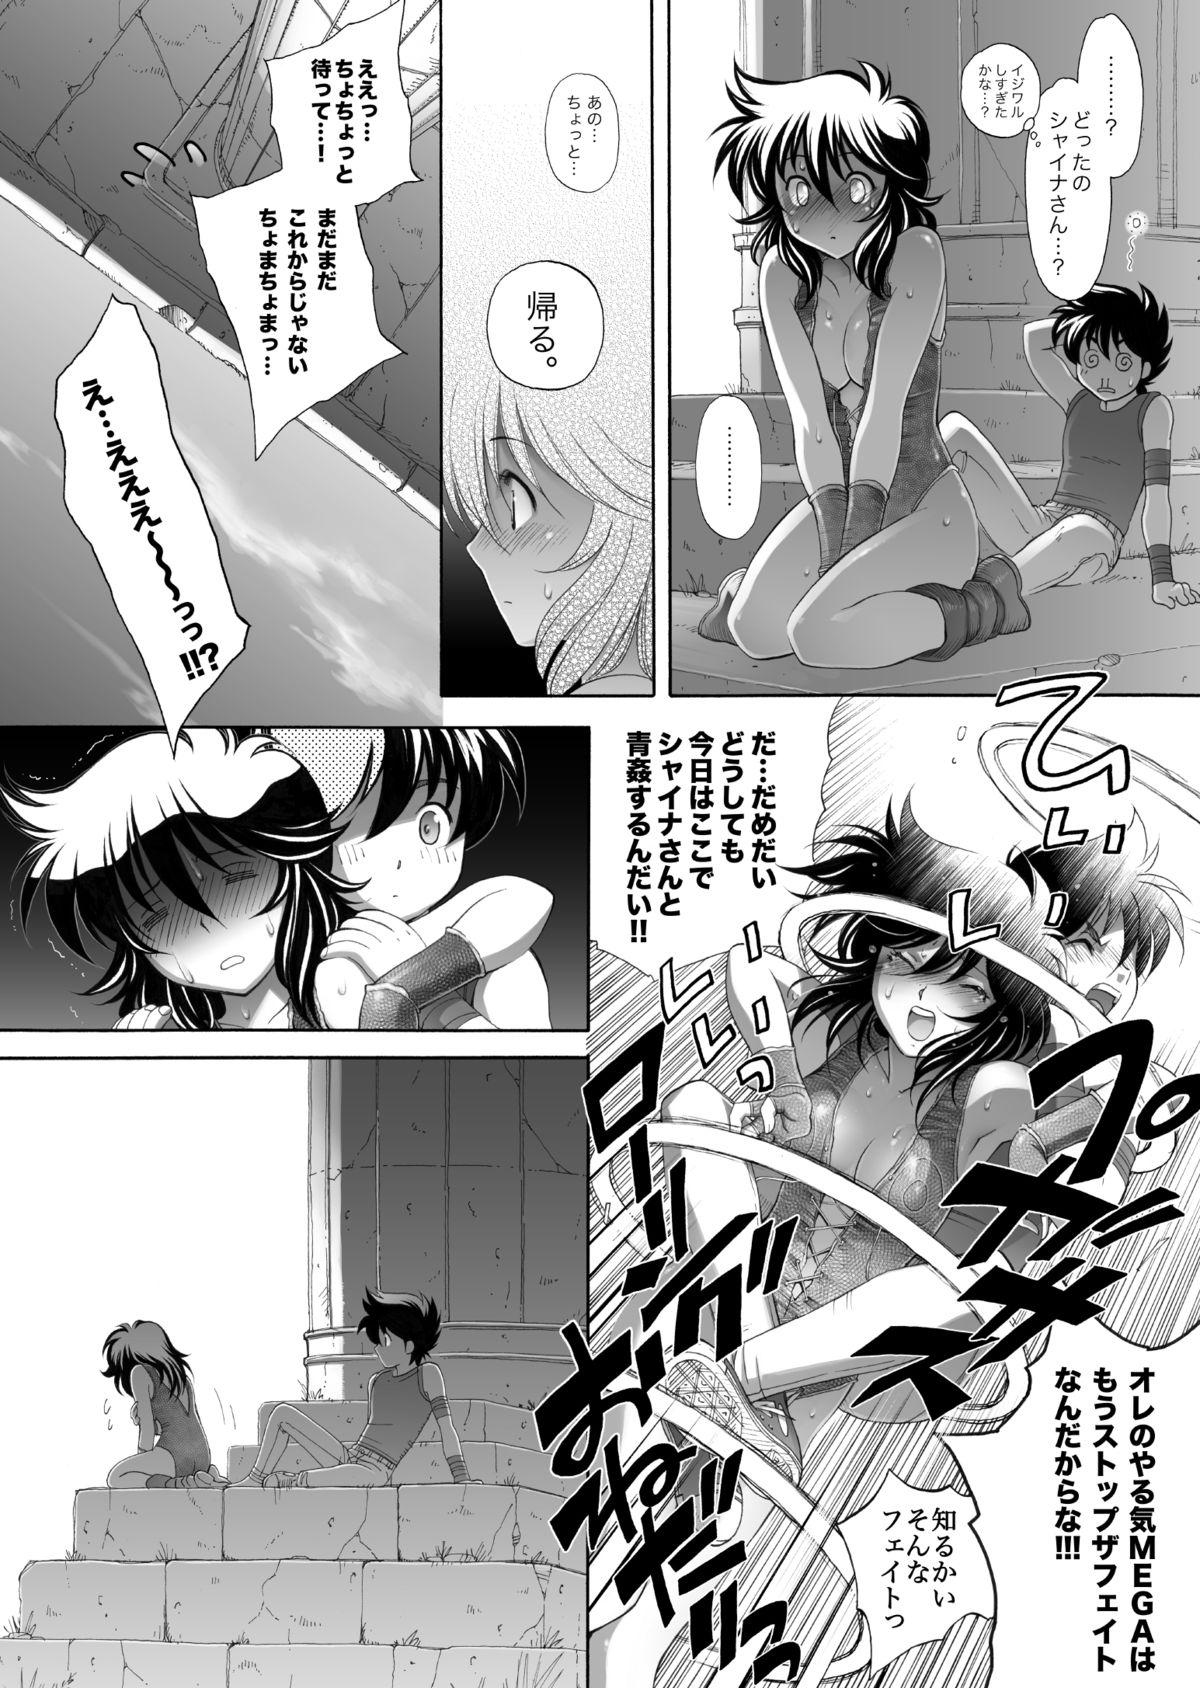 Gay Medic S.I.S.I.O.K.N.M.A. II - Saint seiya Hood - Page 11